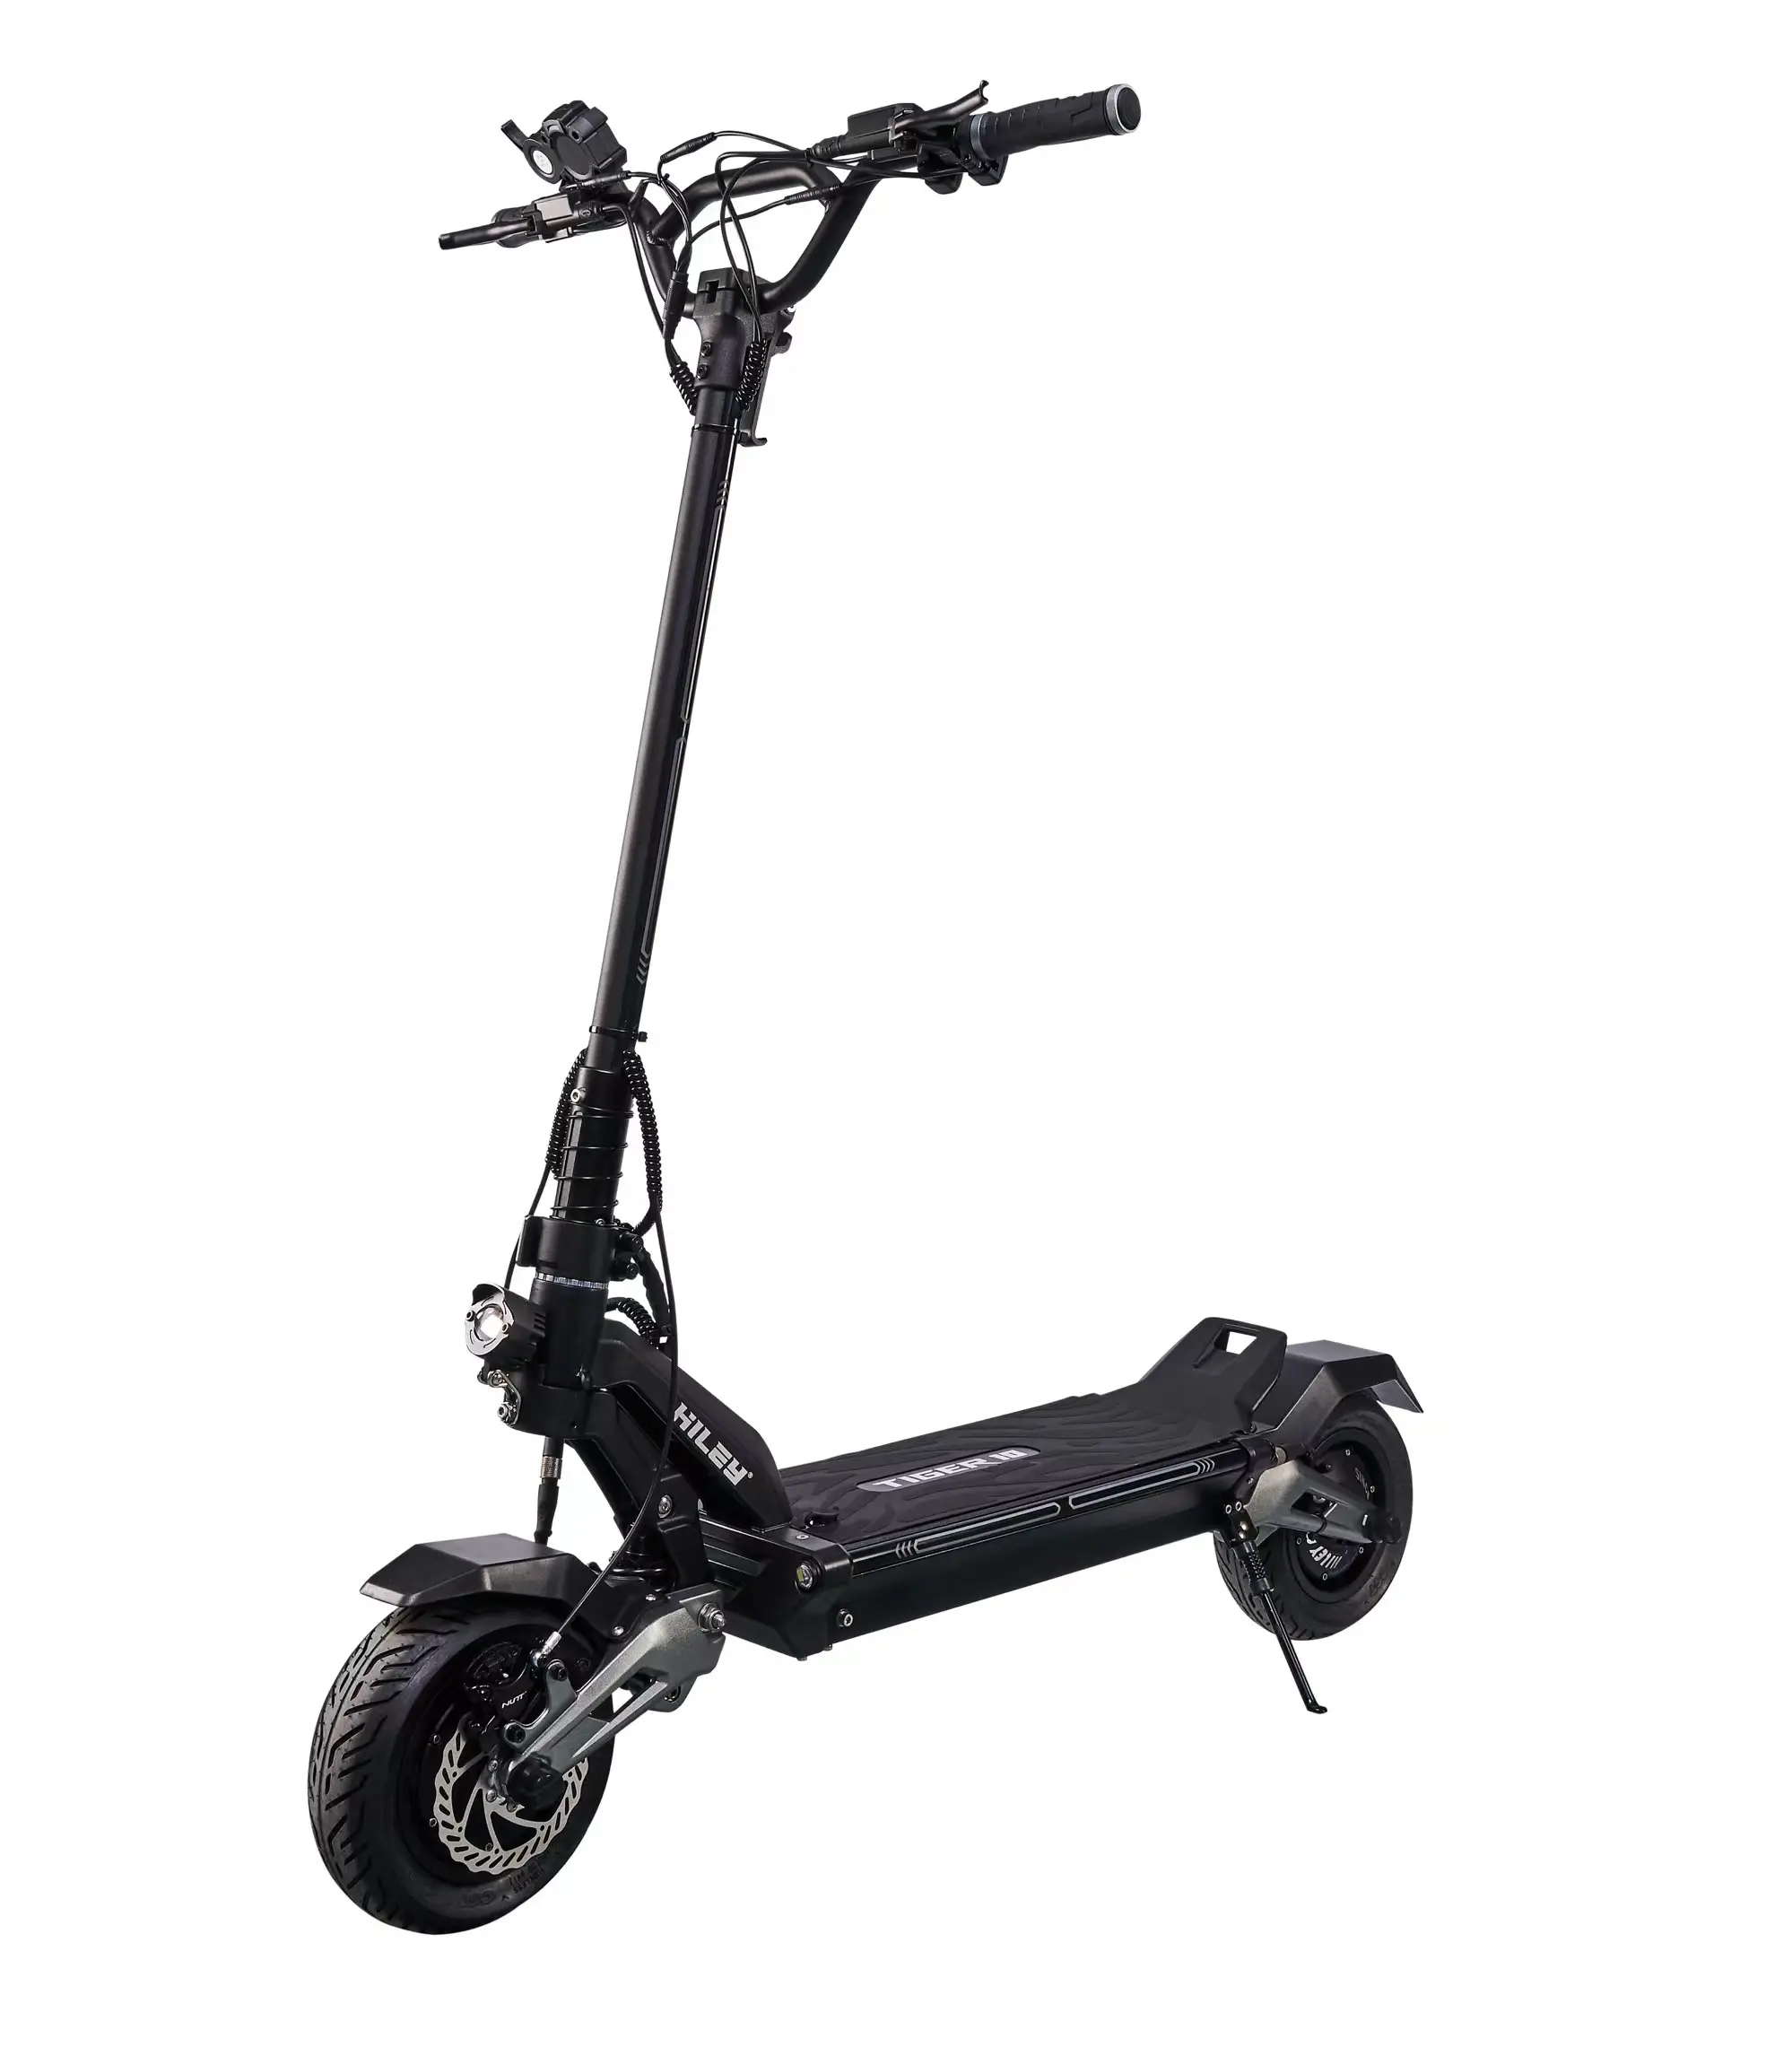 2000w electric scooter foldable right battery scooter 2 wheel scooter mobility